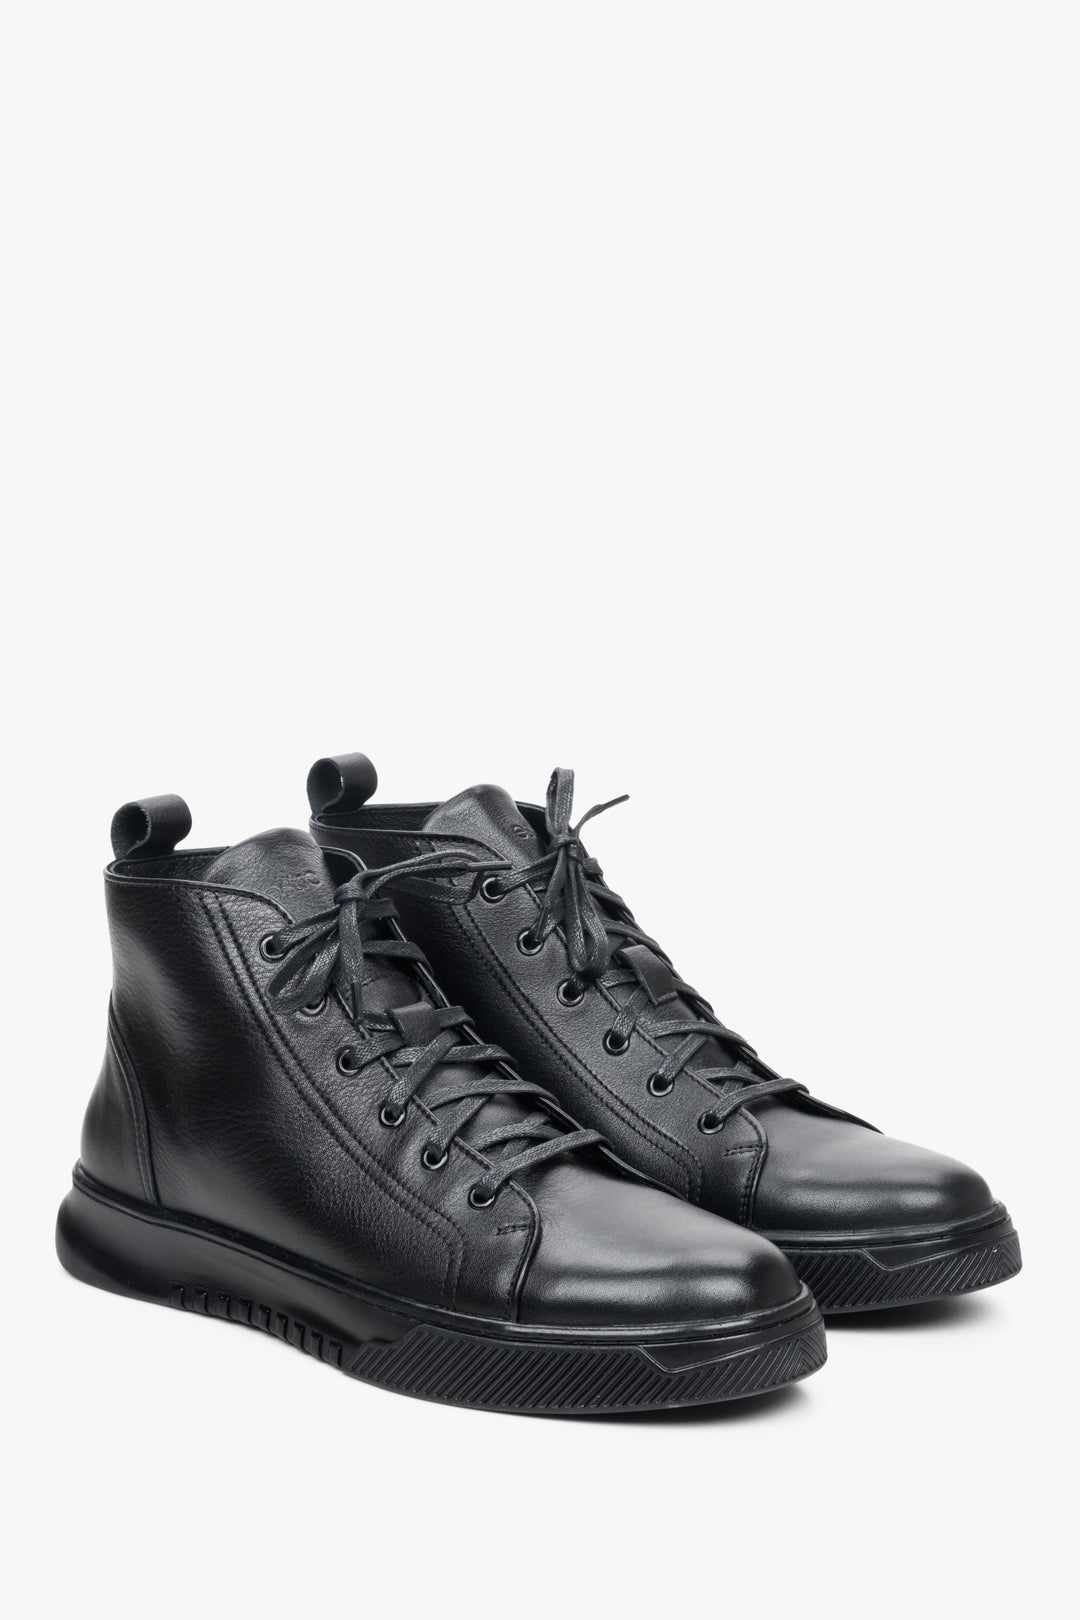 Men's sneakers in black color from natural leather Estro for winter - presentation of a shoe toe and sideline.